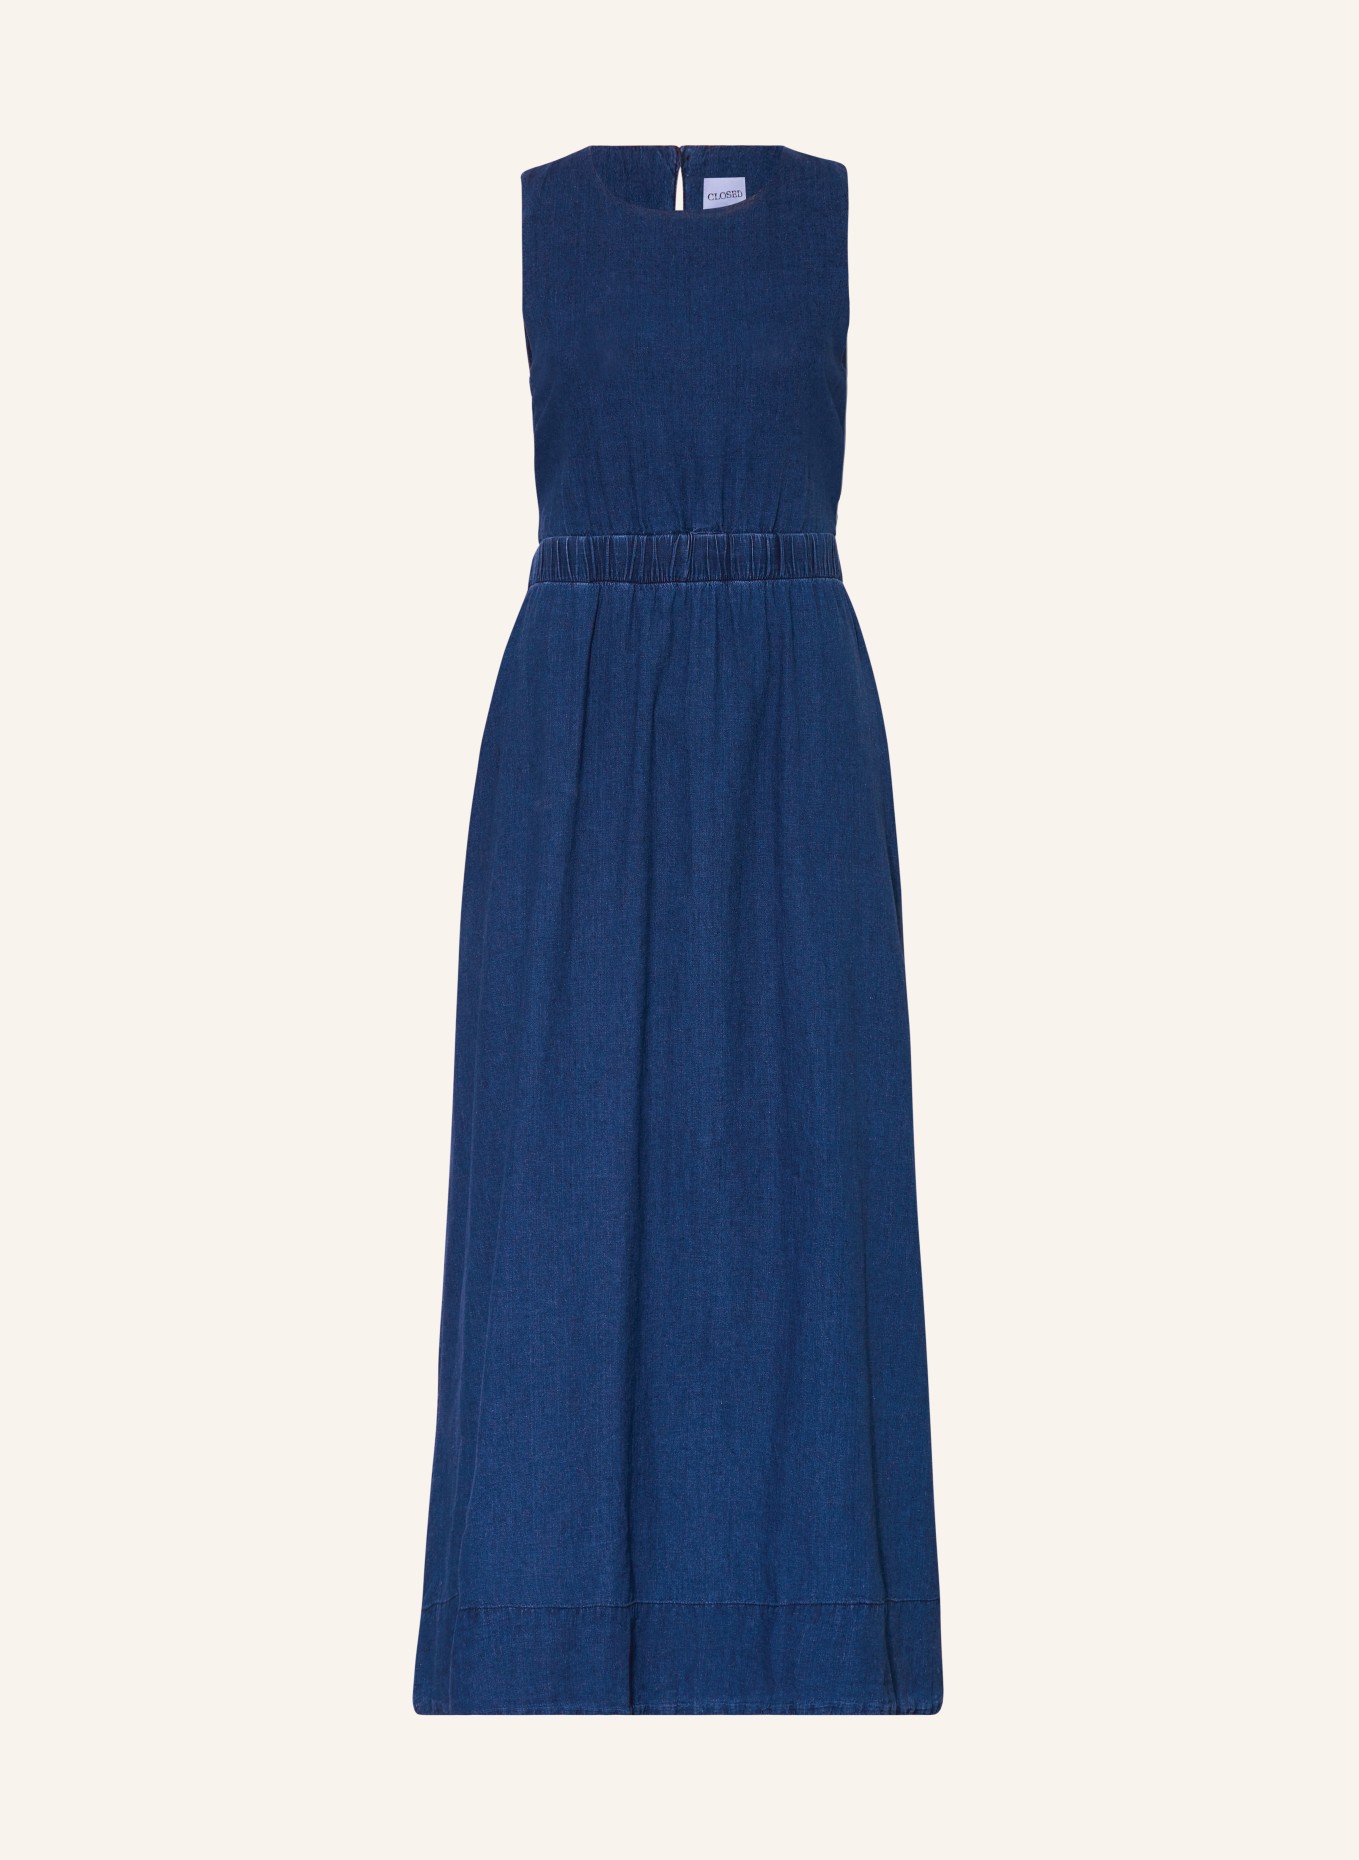 CLOSED Dress in denim look with cut-out, Color: DARK BLUE (Image 1)